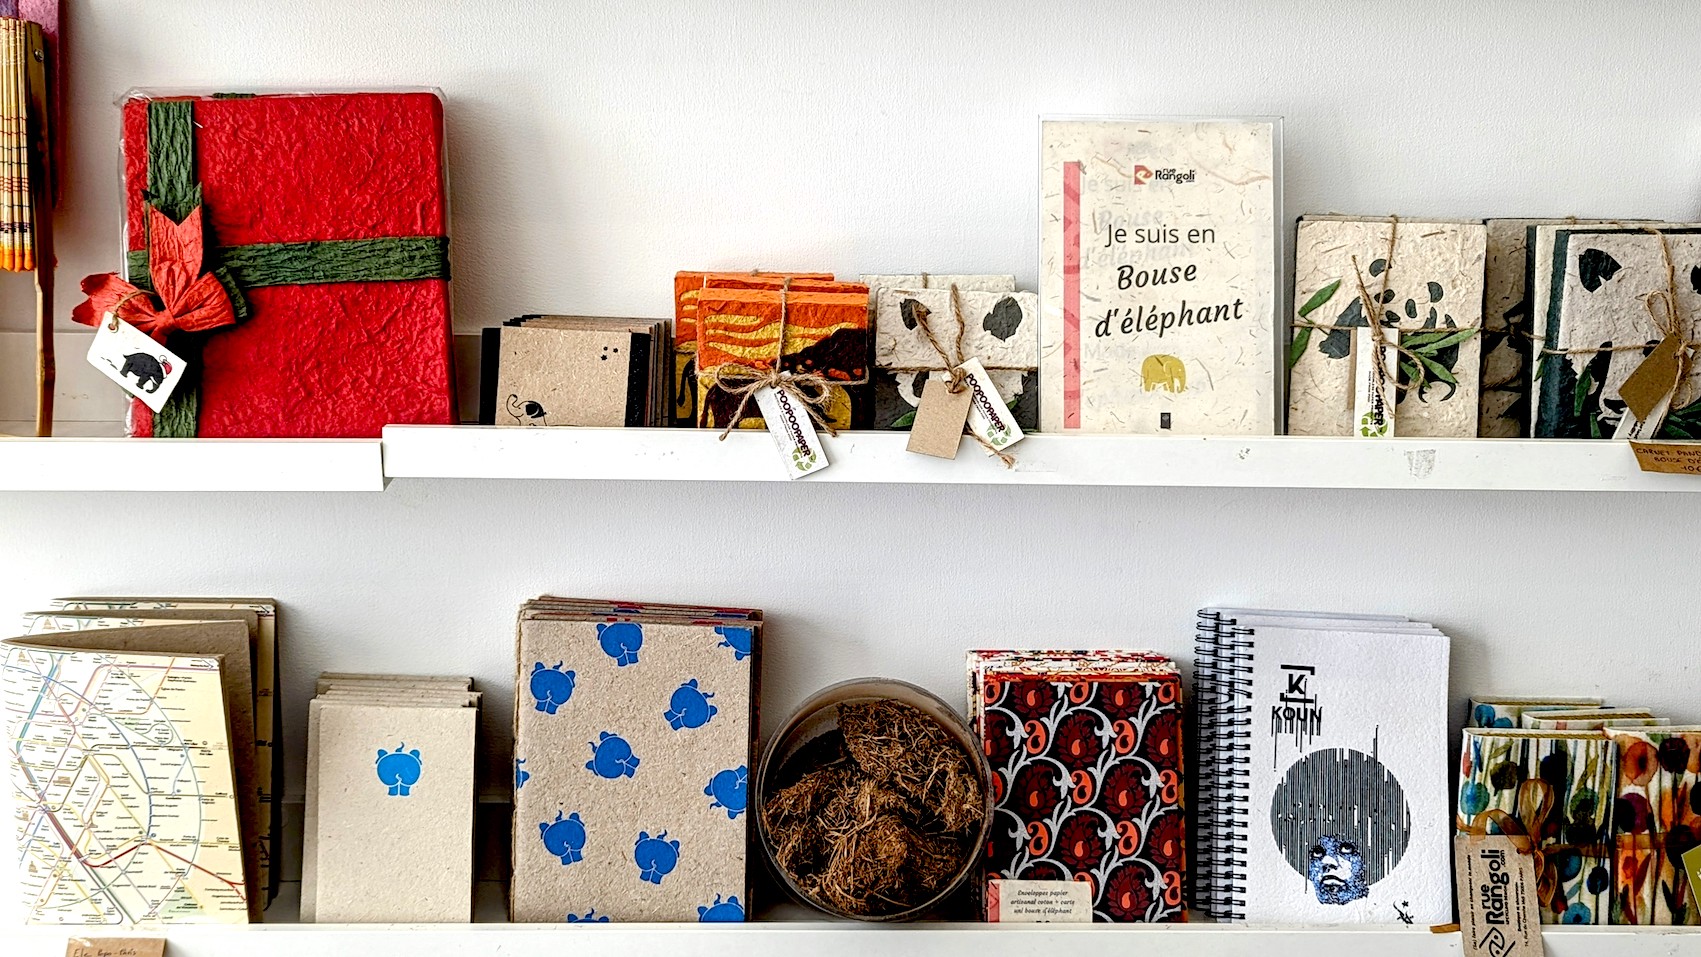 Notebooks made from elephant dung displayed on the shelf at the zero waste upcycling boutique Rue Rangoli.